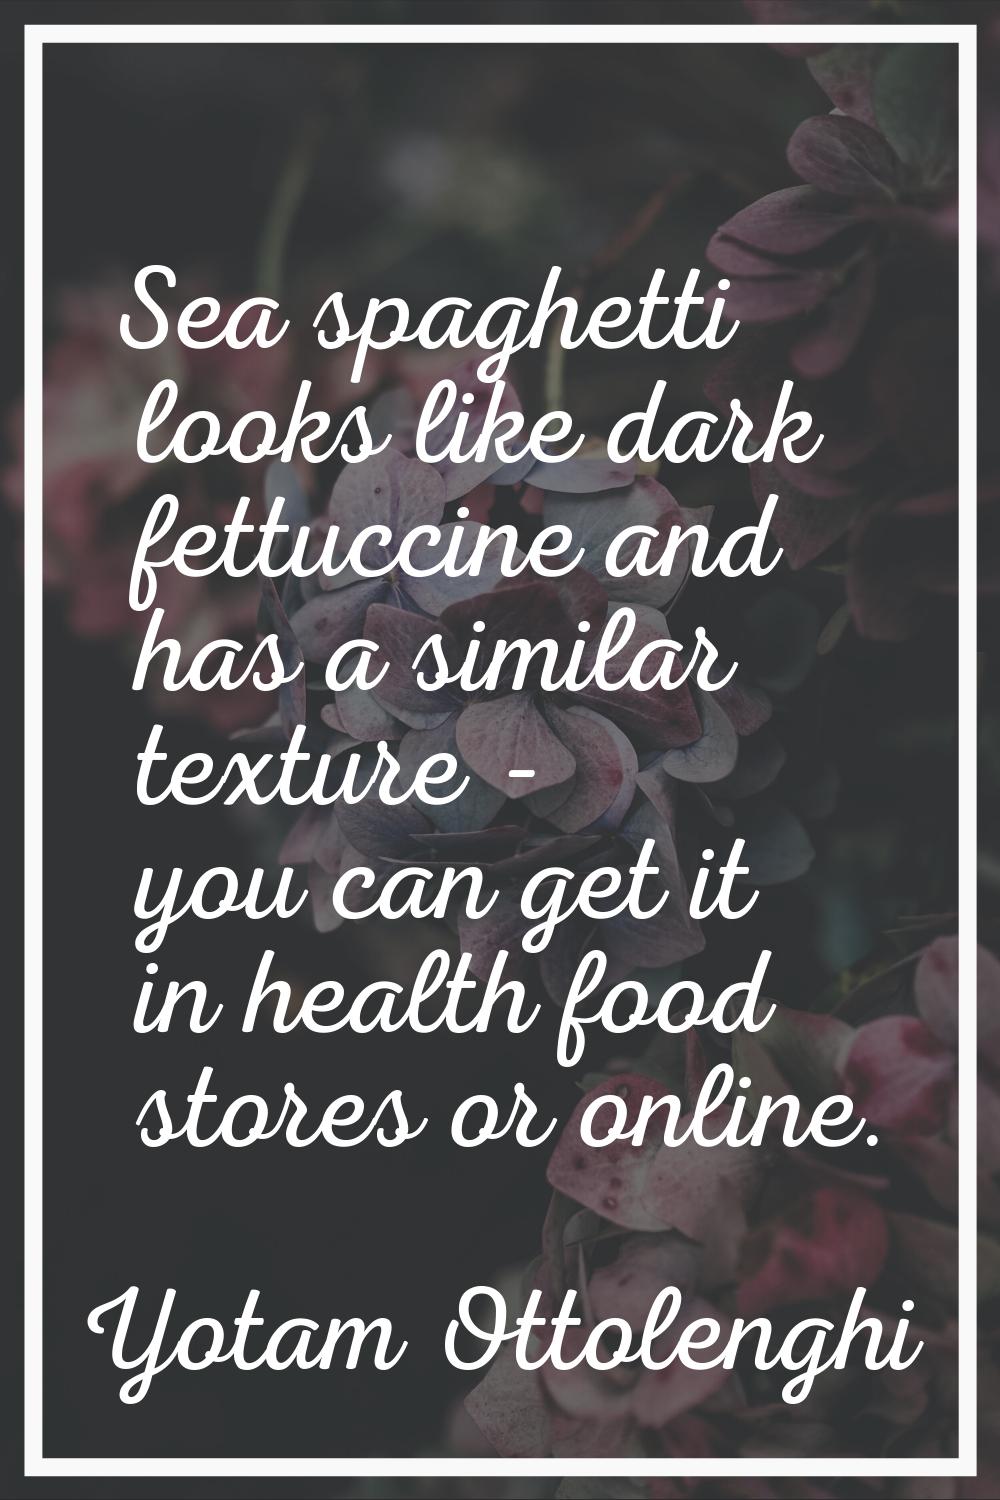 Sea spaghetti looks like dark fettuccine and has a similar texture - you can get it in health food 